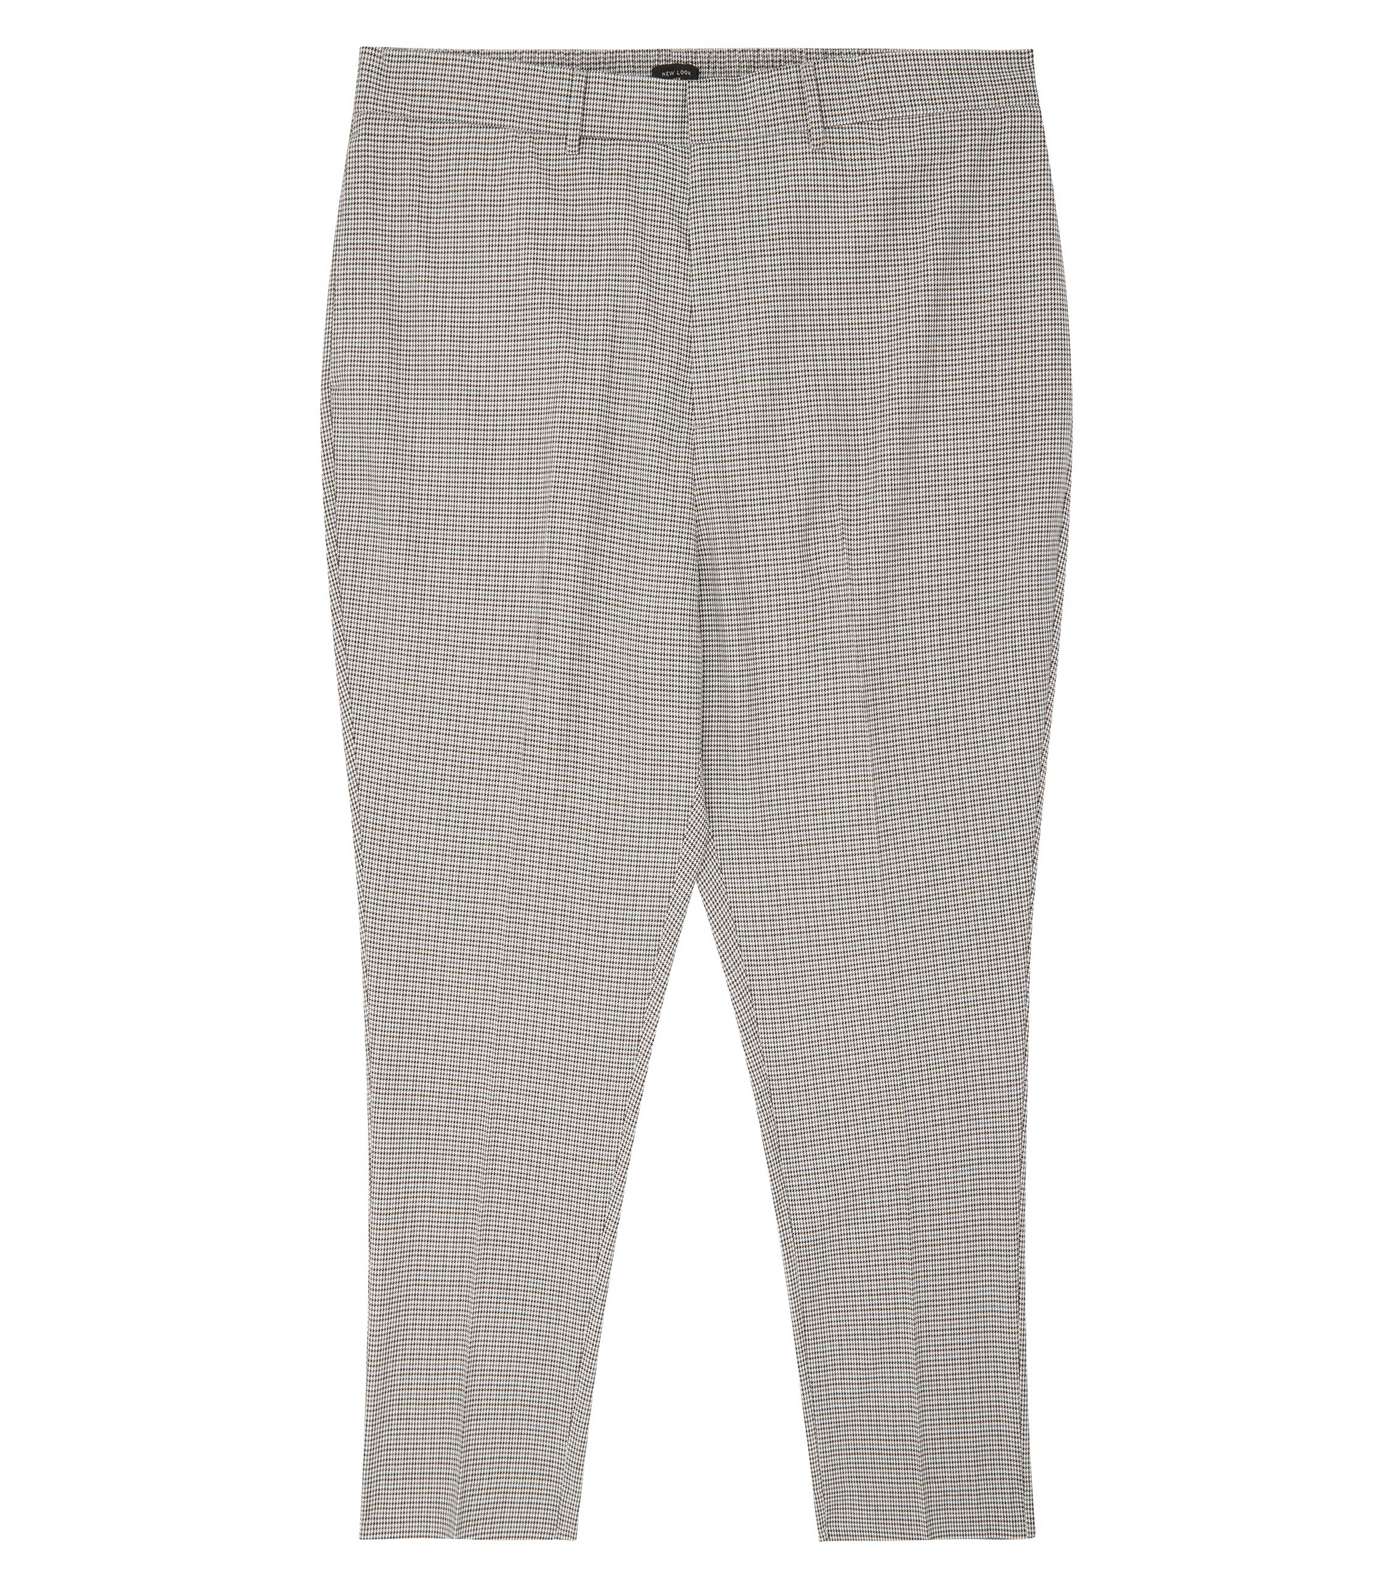 Plus Size Black Dogtooth Check Trousers Image 4